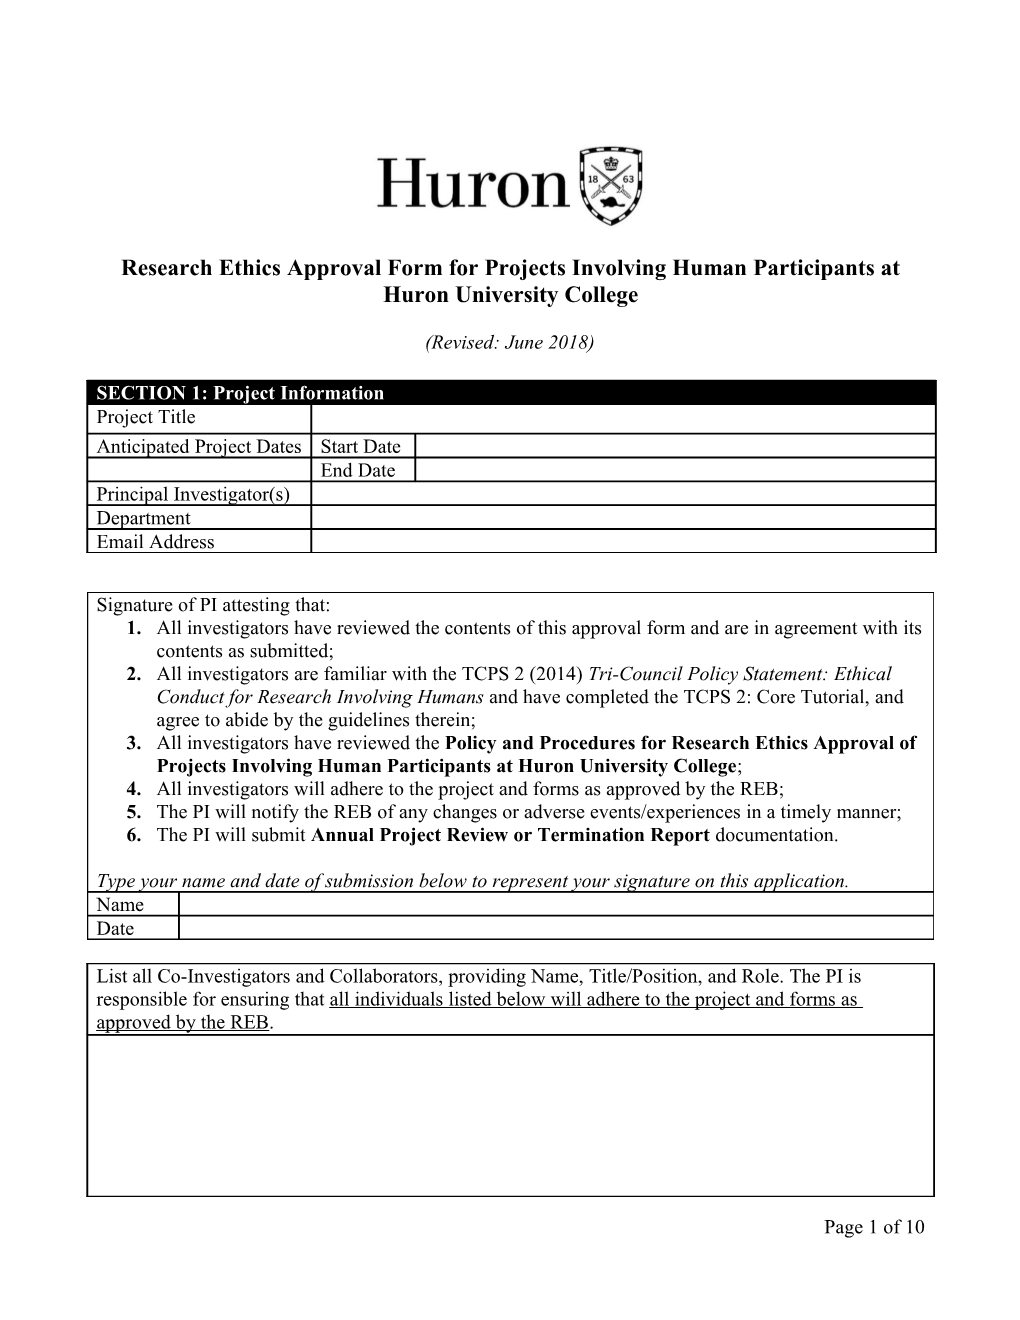 Research Ethics Approval Form for Projects Involving Human Participants at Huron University